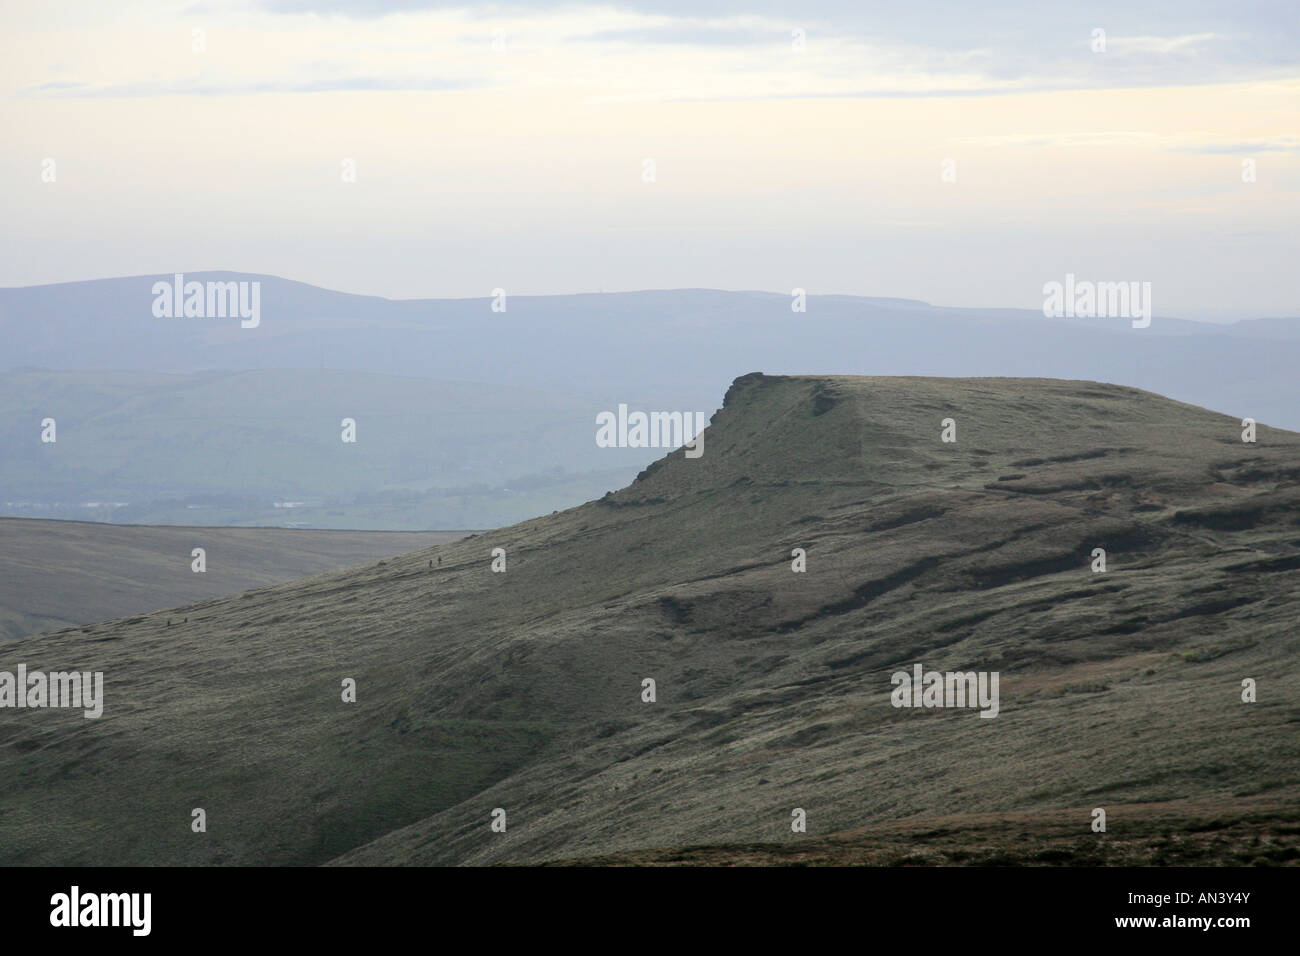 Swine's Back on Kinder Scout in the Peak District national park England Stock Photo